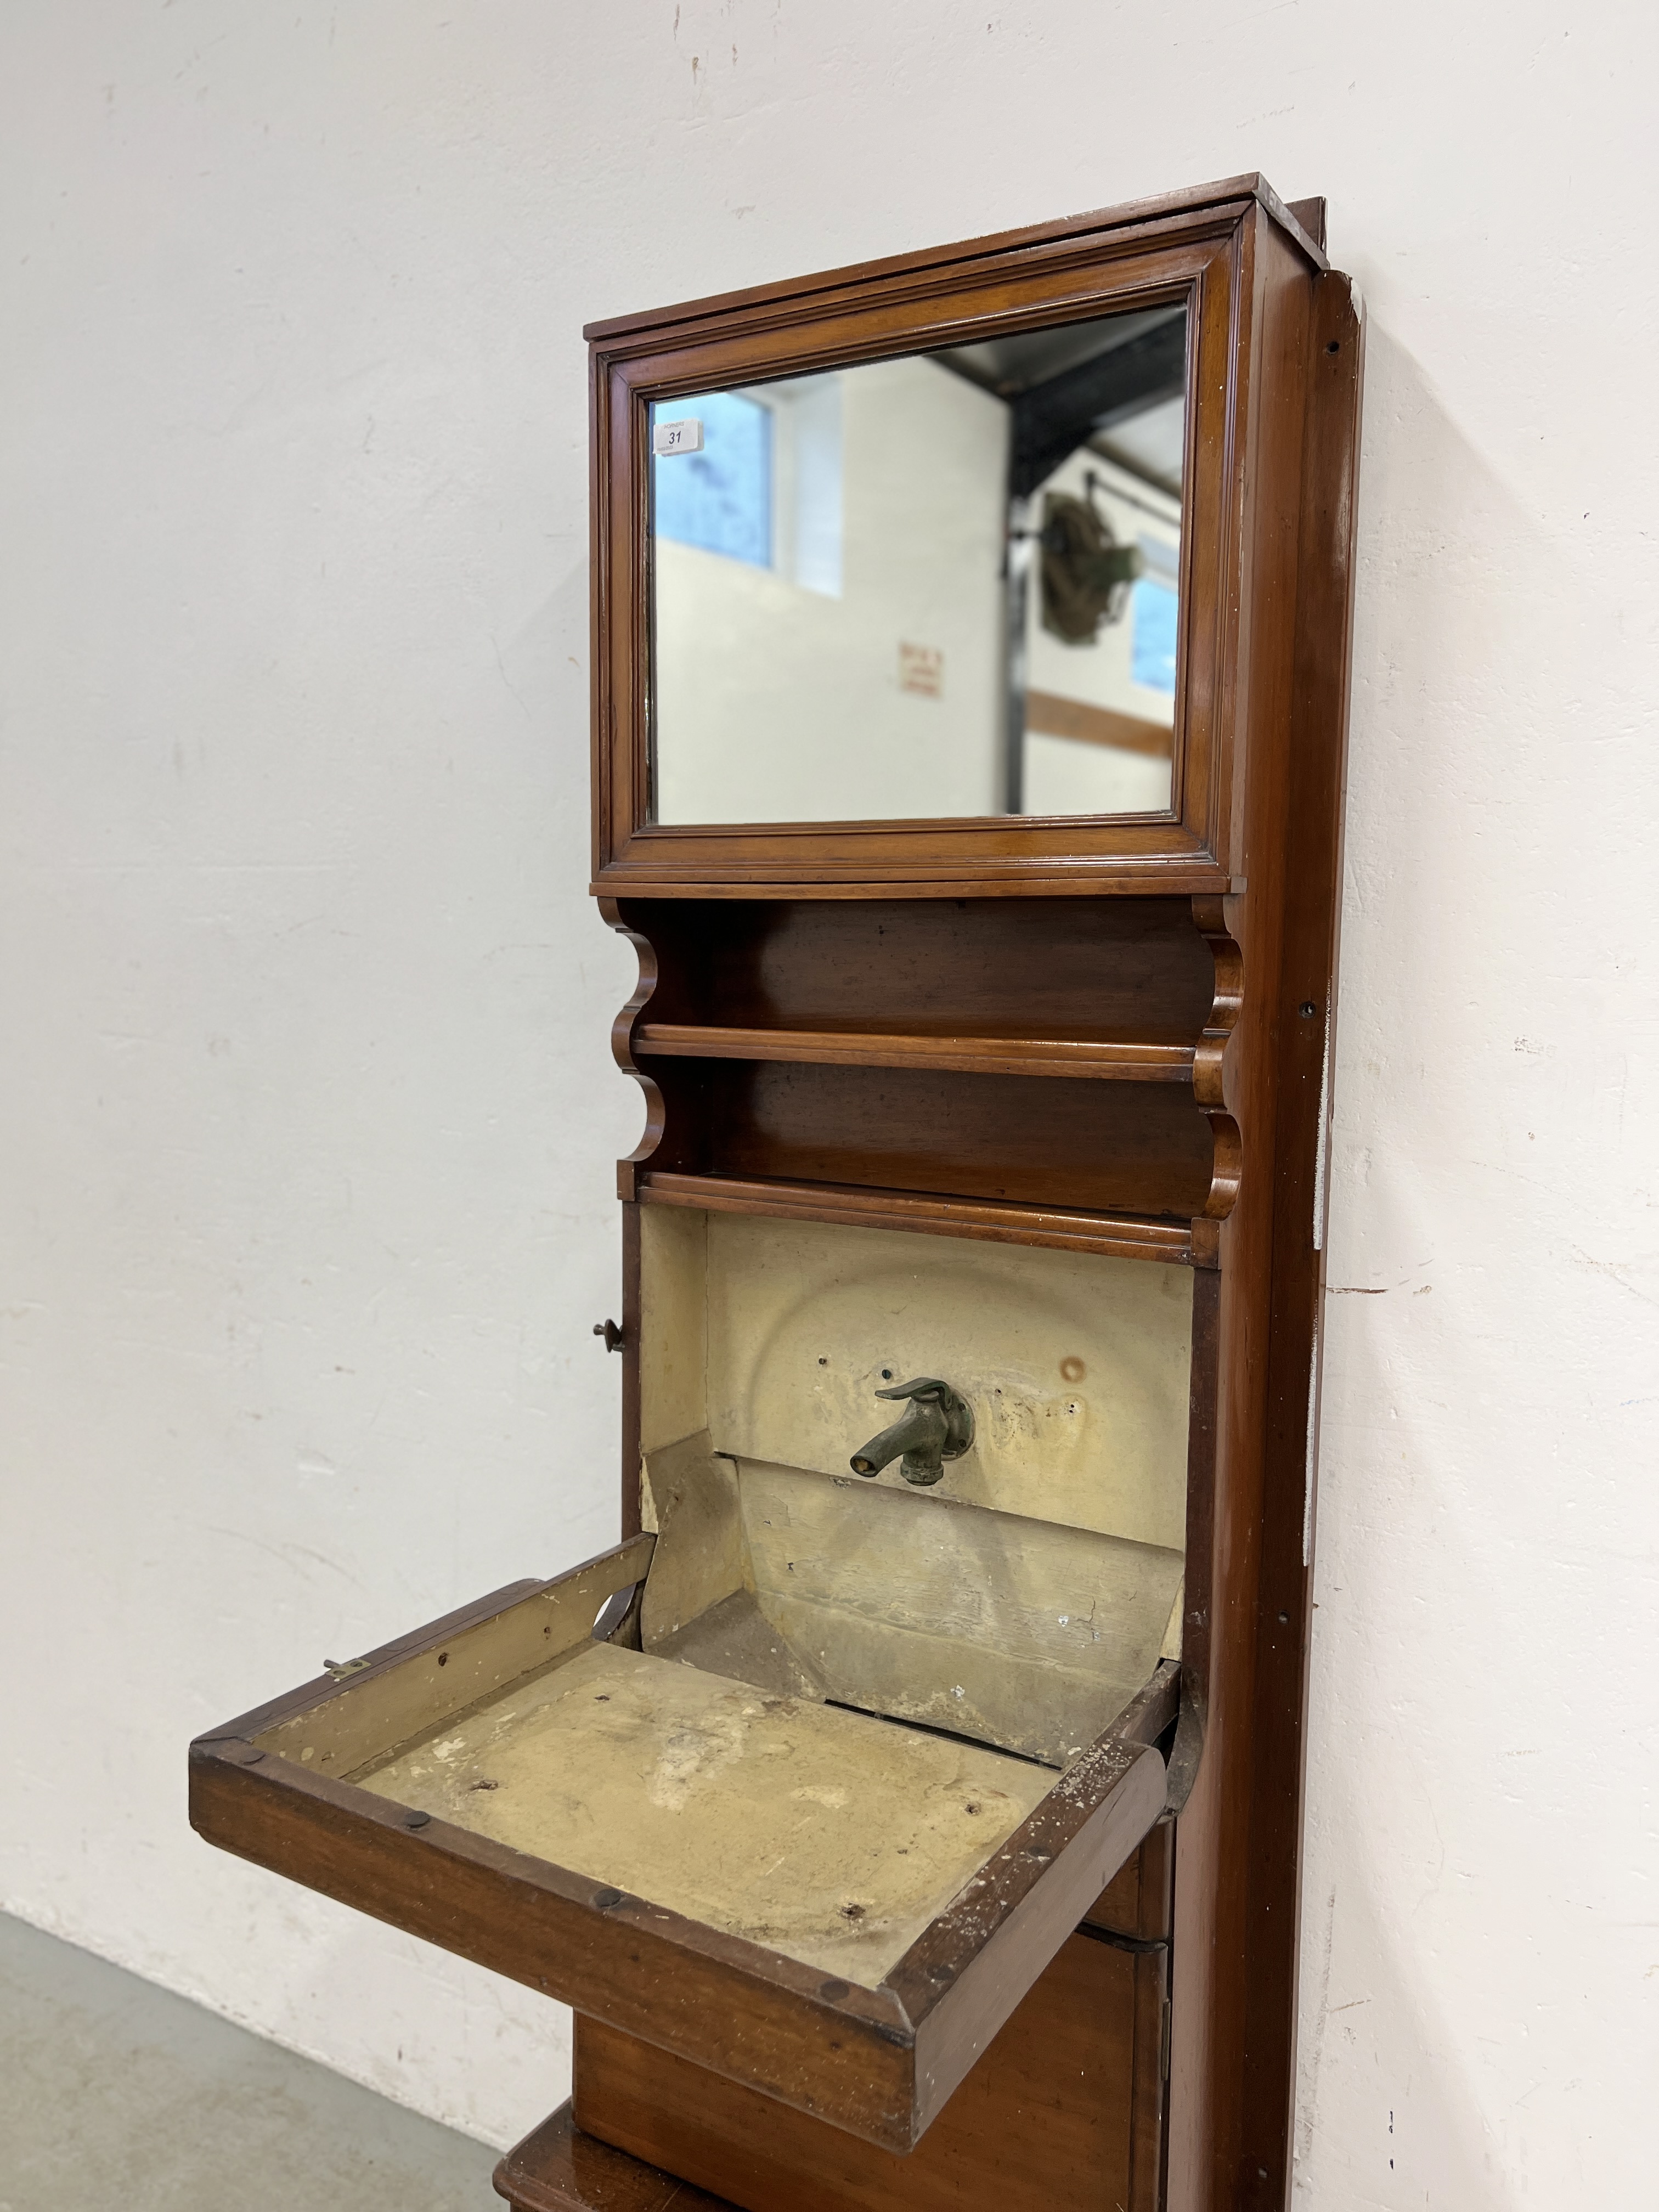 A VICTORIAN MAHOGANY SHIP'S WASH STAND WITH MIRRORED DOOR ABOVE - W 54CM X D 29CM X H 164CM. - Image 4 of 9